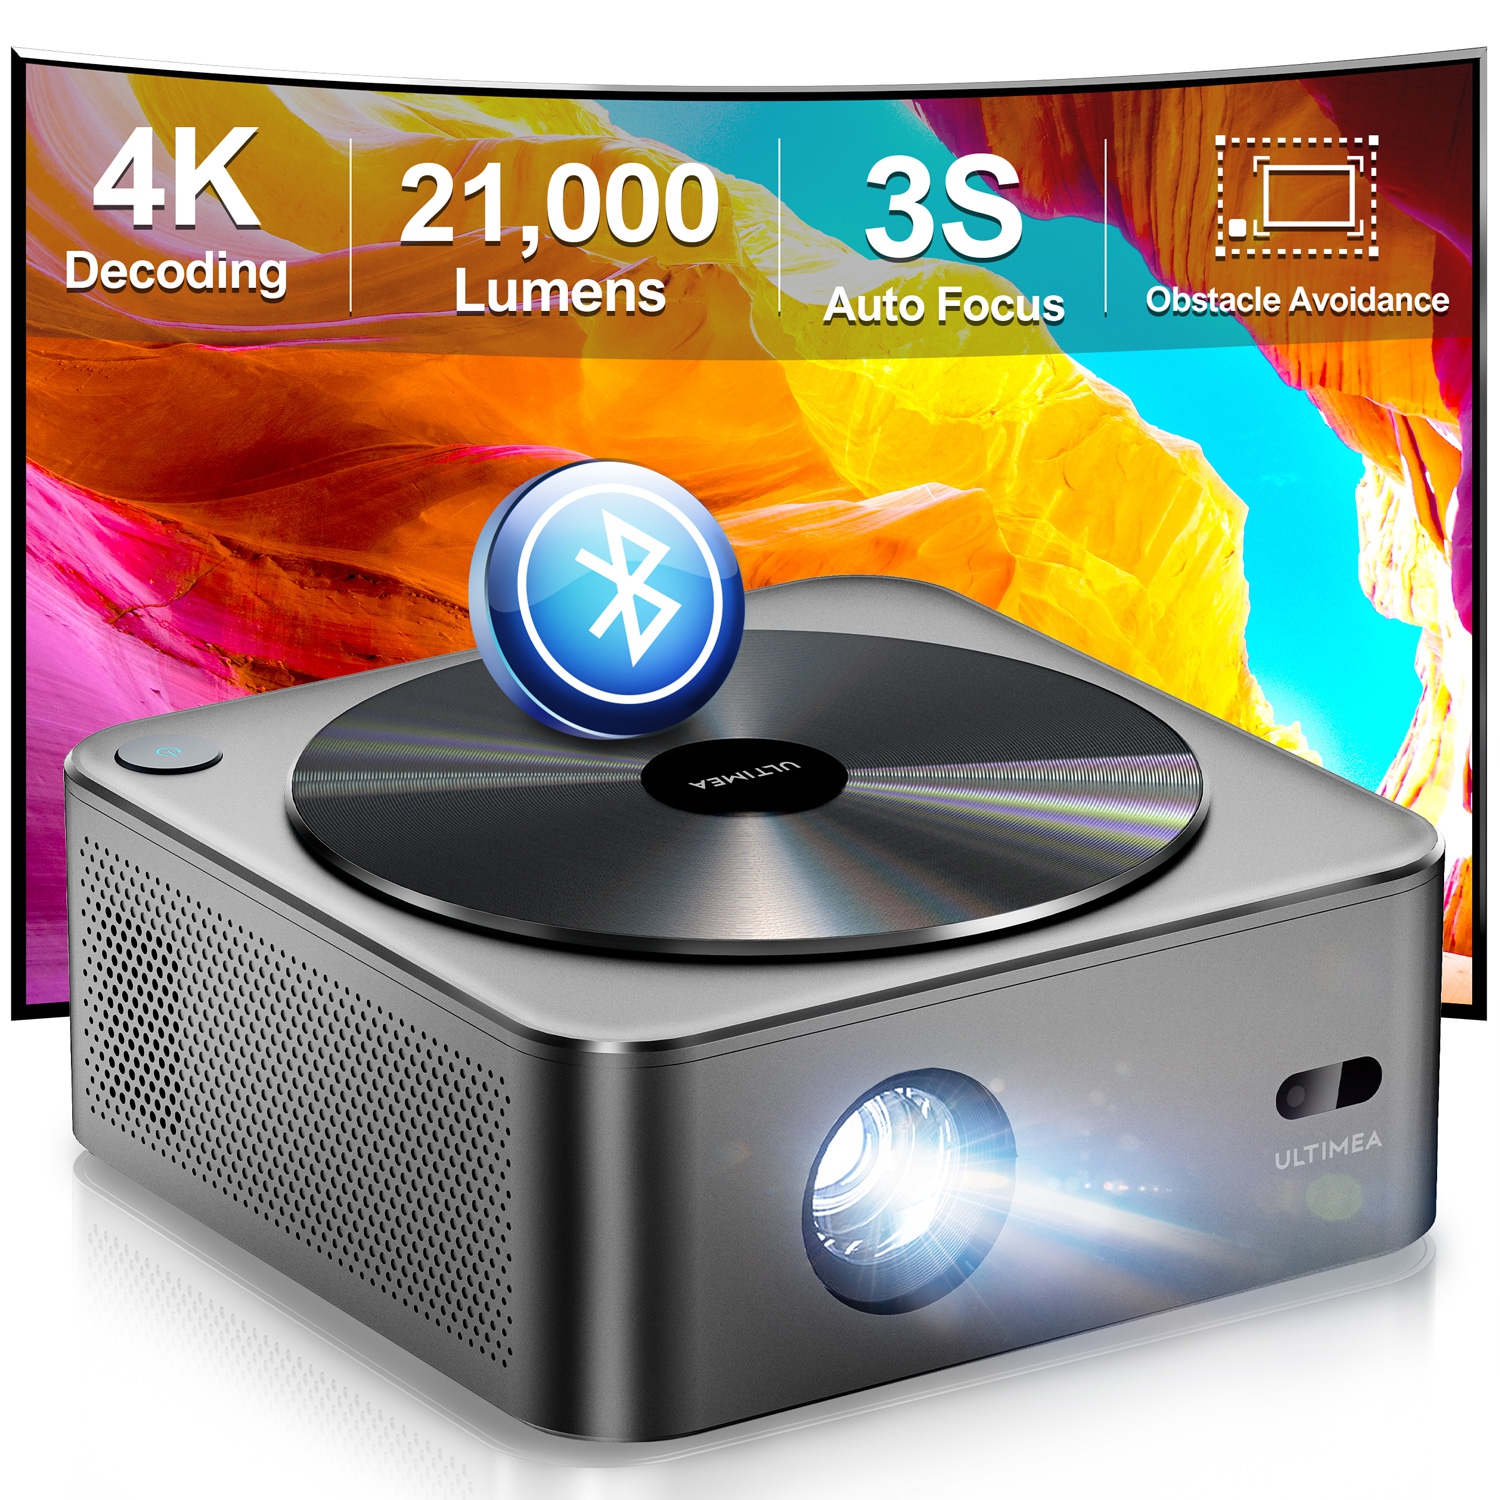 [4K Projector & HDR 10] Ultimea Auto Focus Smart Projector, Native 1080P 700 ANSI, with WiFi 6 and Bluetooth 5.2, Home Theater Projector with 6D Auto Keystone for Phone/PC/TV Stick